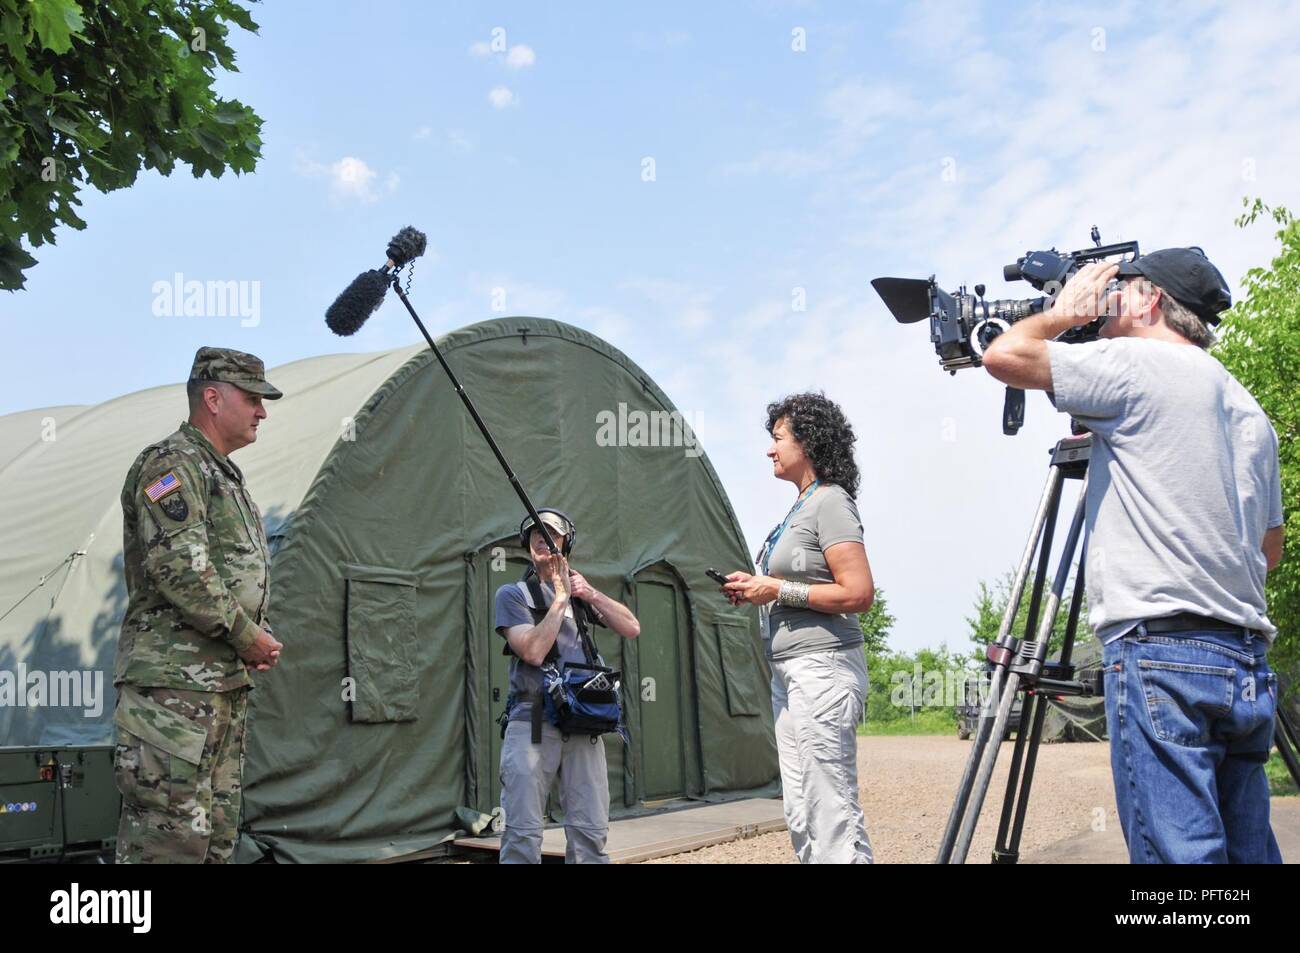 Brig. Gen. Clint E. Walker, commander, 184th Sustainment Command, being interviewed by Defense Logistics Agency, Nutan Chada,  on June 1, in Powidz, Poland about the relationship between 184th SC and DLA during Saber Strike 18. The Saber Strike exercises have had great success in creating a foundation for the strong relationships we share with several European allies and partners today. (Mississippi National Guard Stock Photo